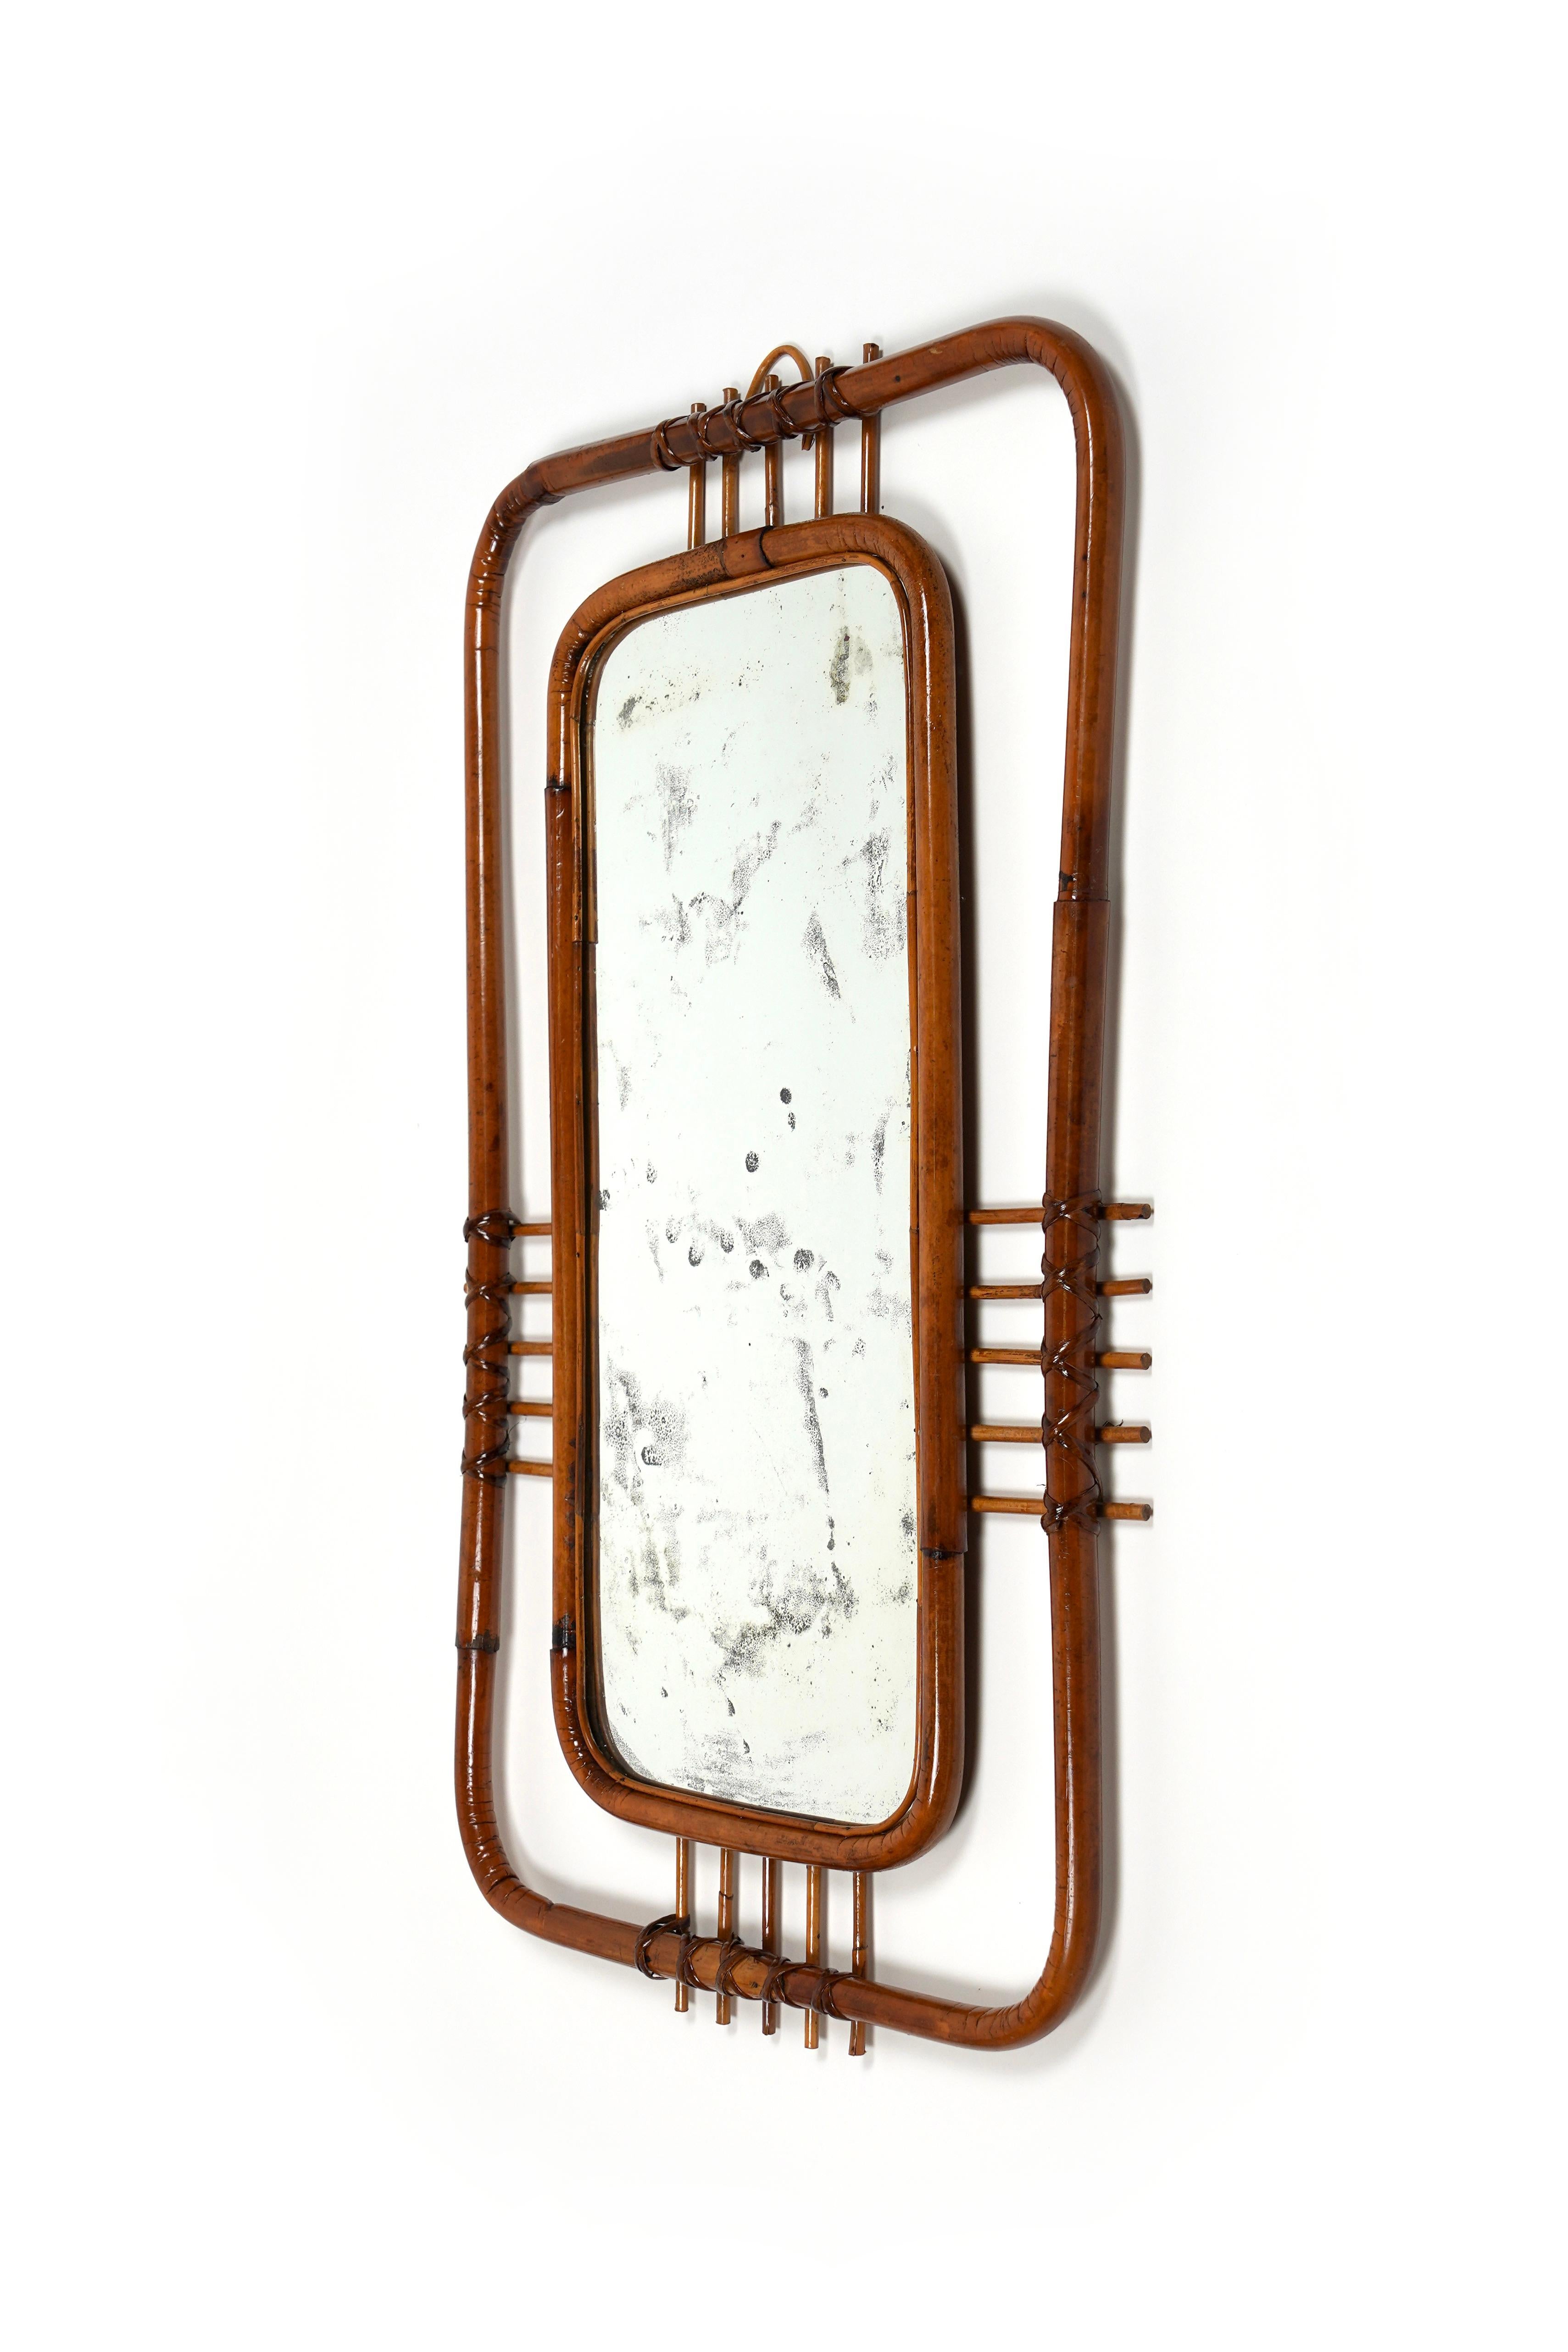 Midcentury Bamboo and Rattan Geometric Wall Mirror, Italy, 1950s In Good Condition For Sale In Rome, IT